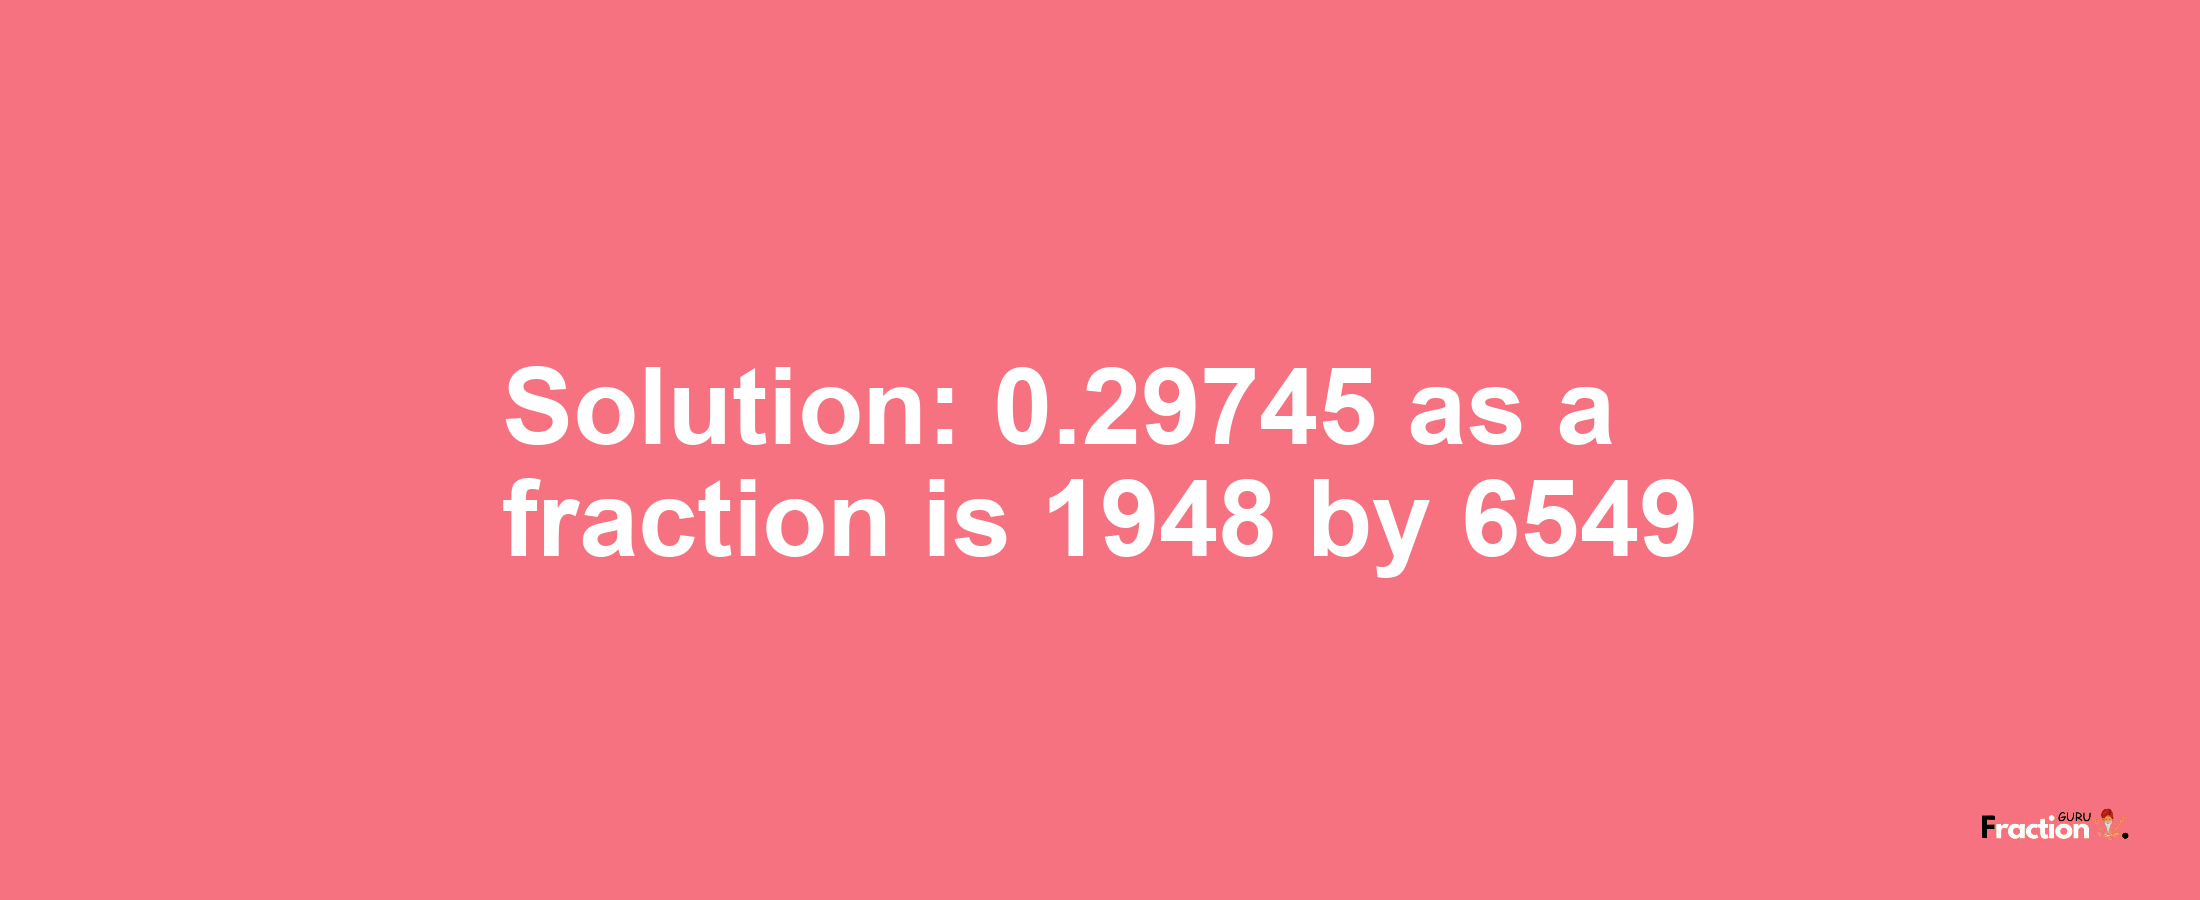 Solution:0.29745 as a fraction is 1948/6549